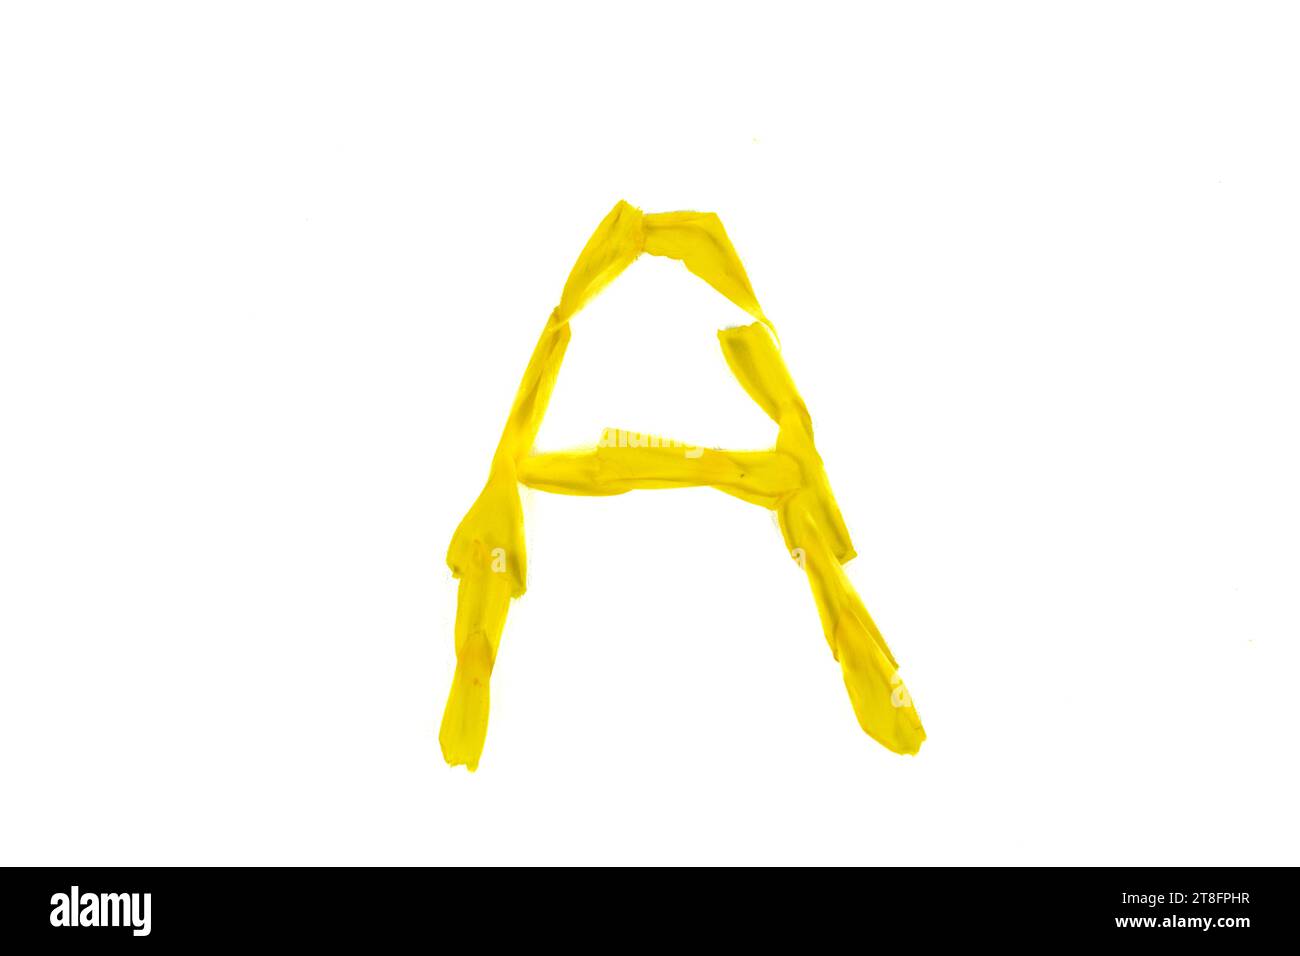 Letter A made from Damiana flower petals on a white background Stock Photo